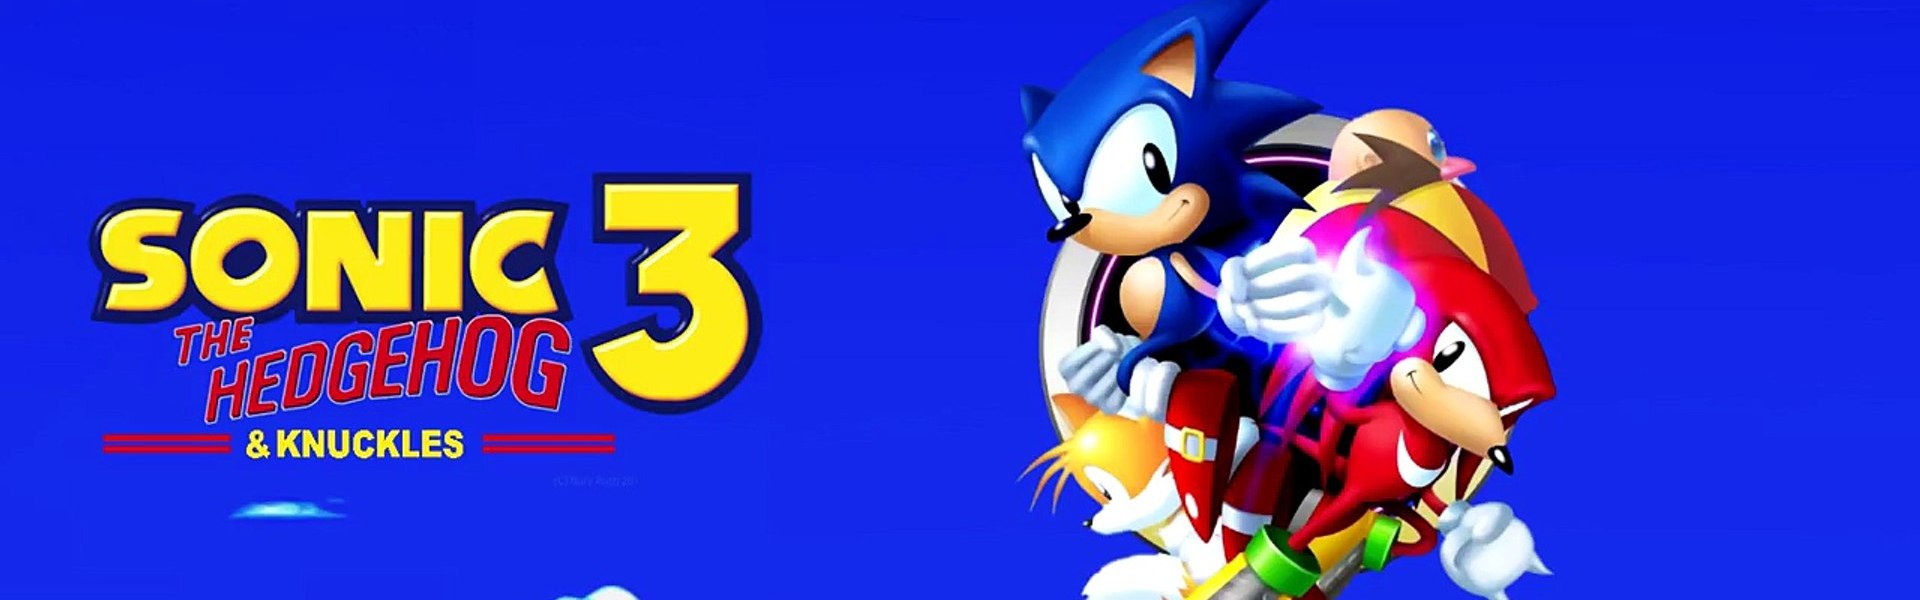 Sonic 3 and knuckles steam version фото 32